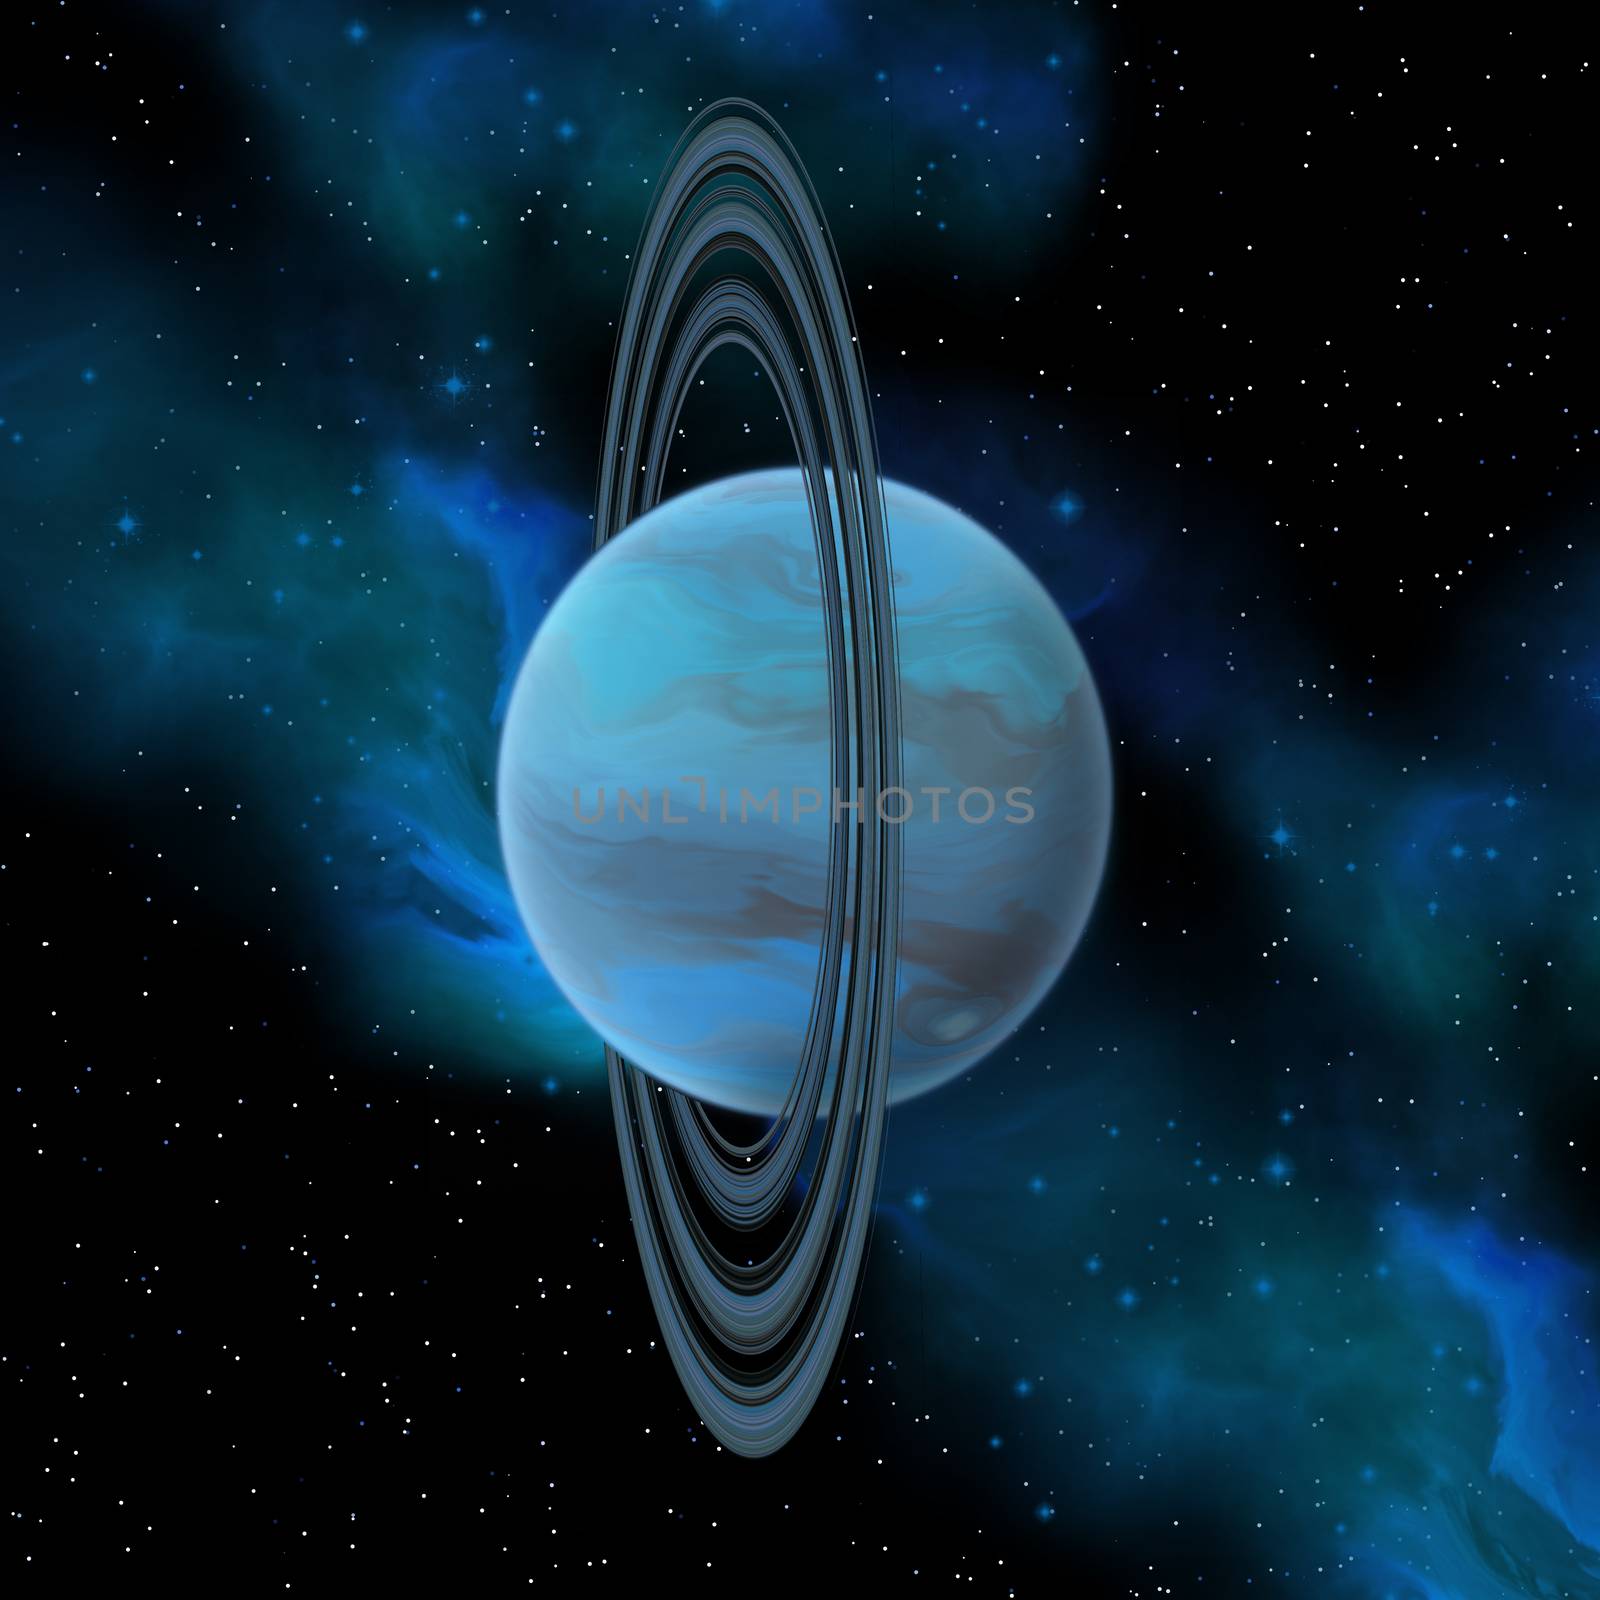 Uranus is the seventh planet in our solar system and has 27 moons and a vertical ring system.